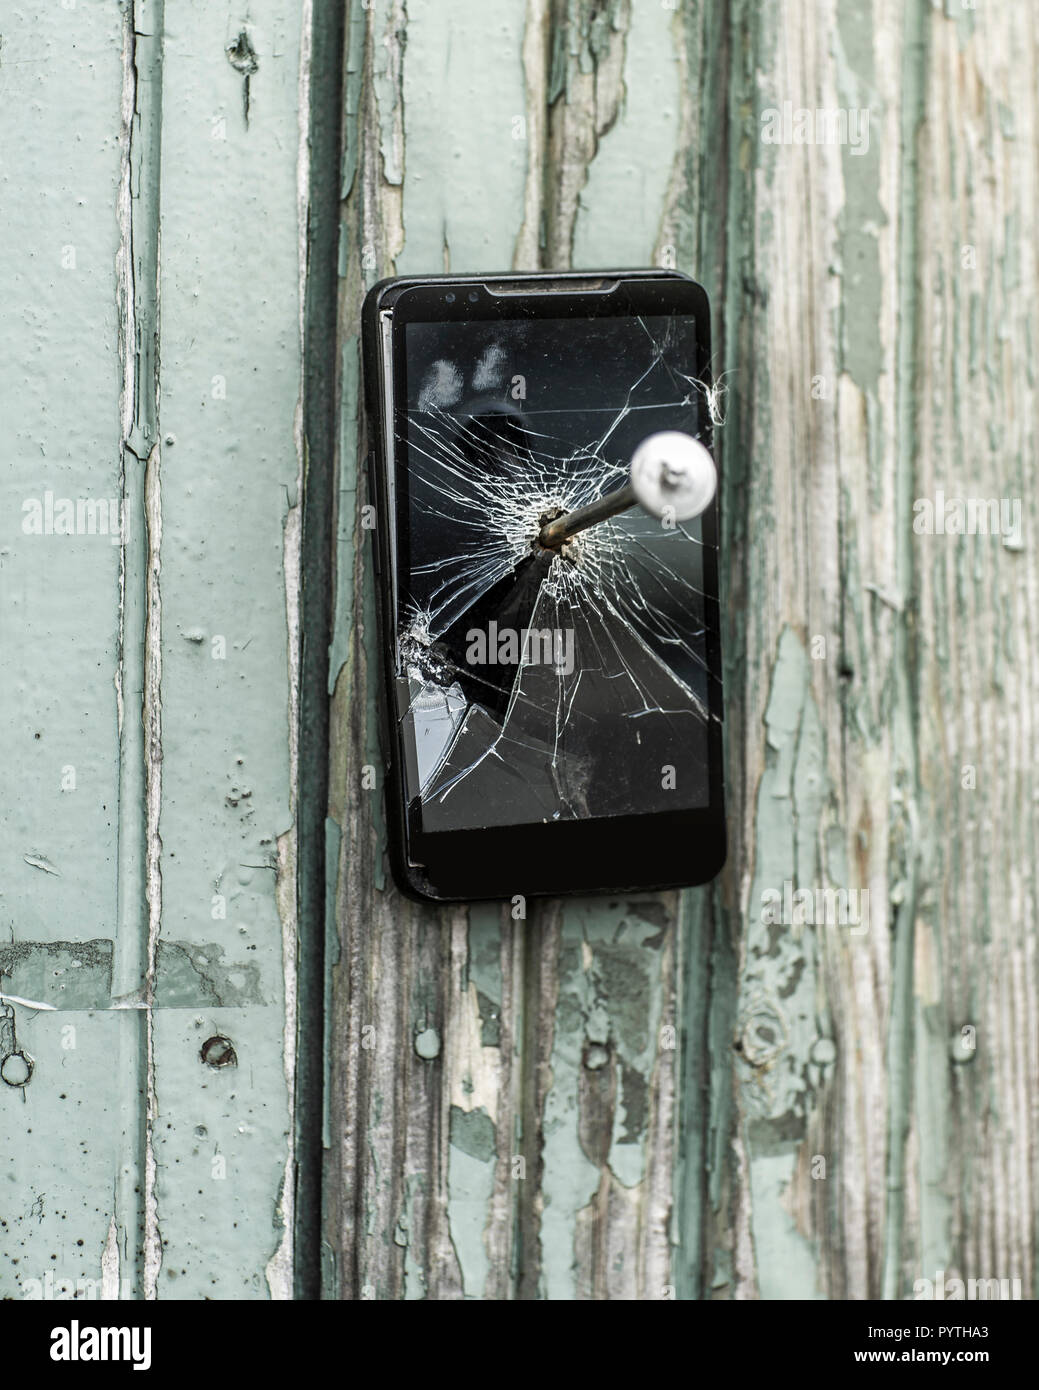 concept of obsolete technology:mobile phone nailed to the fence a large nail Stock Photo